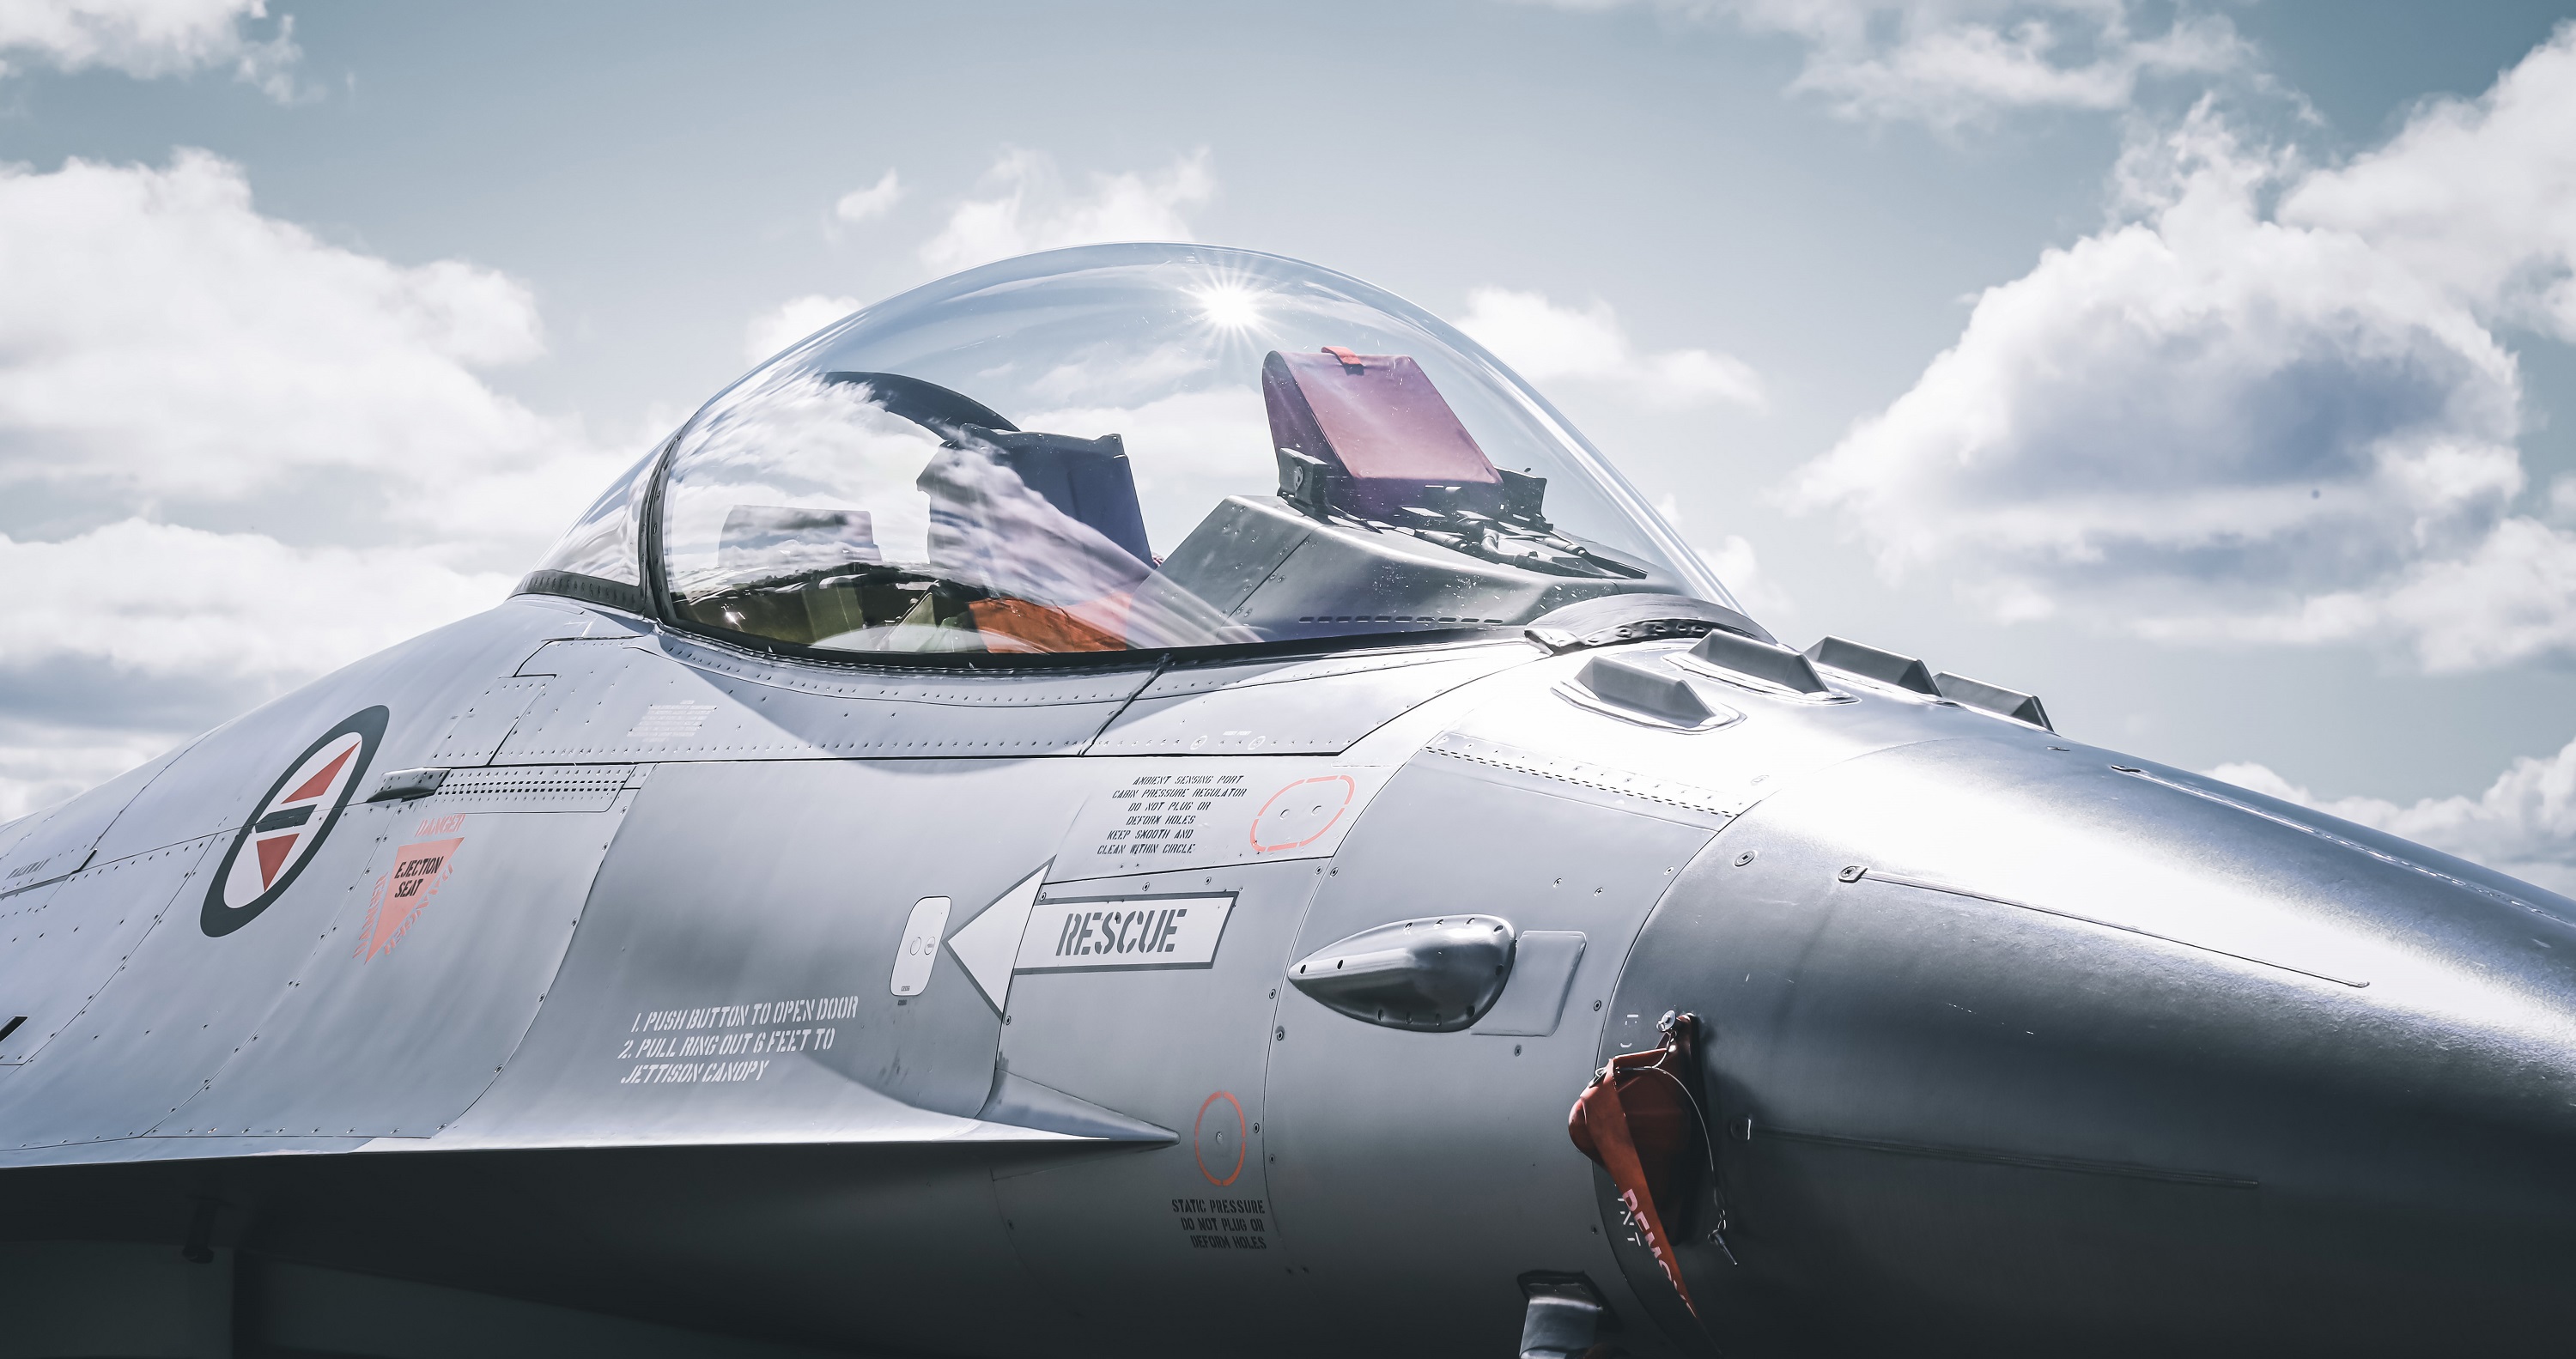 F-16 of the Norwegian Airforce Photo By Njål Frilseth